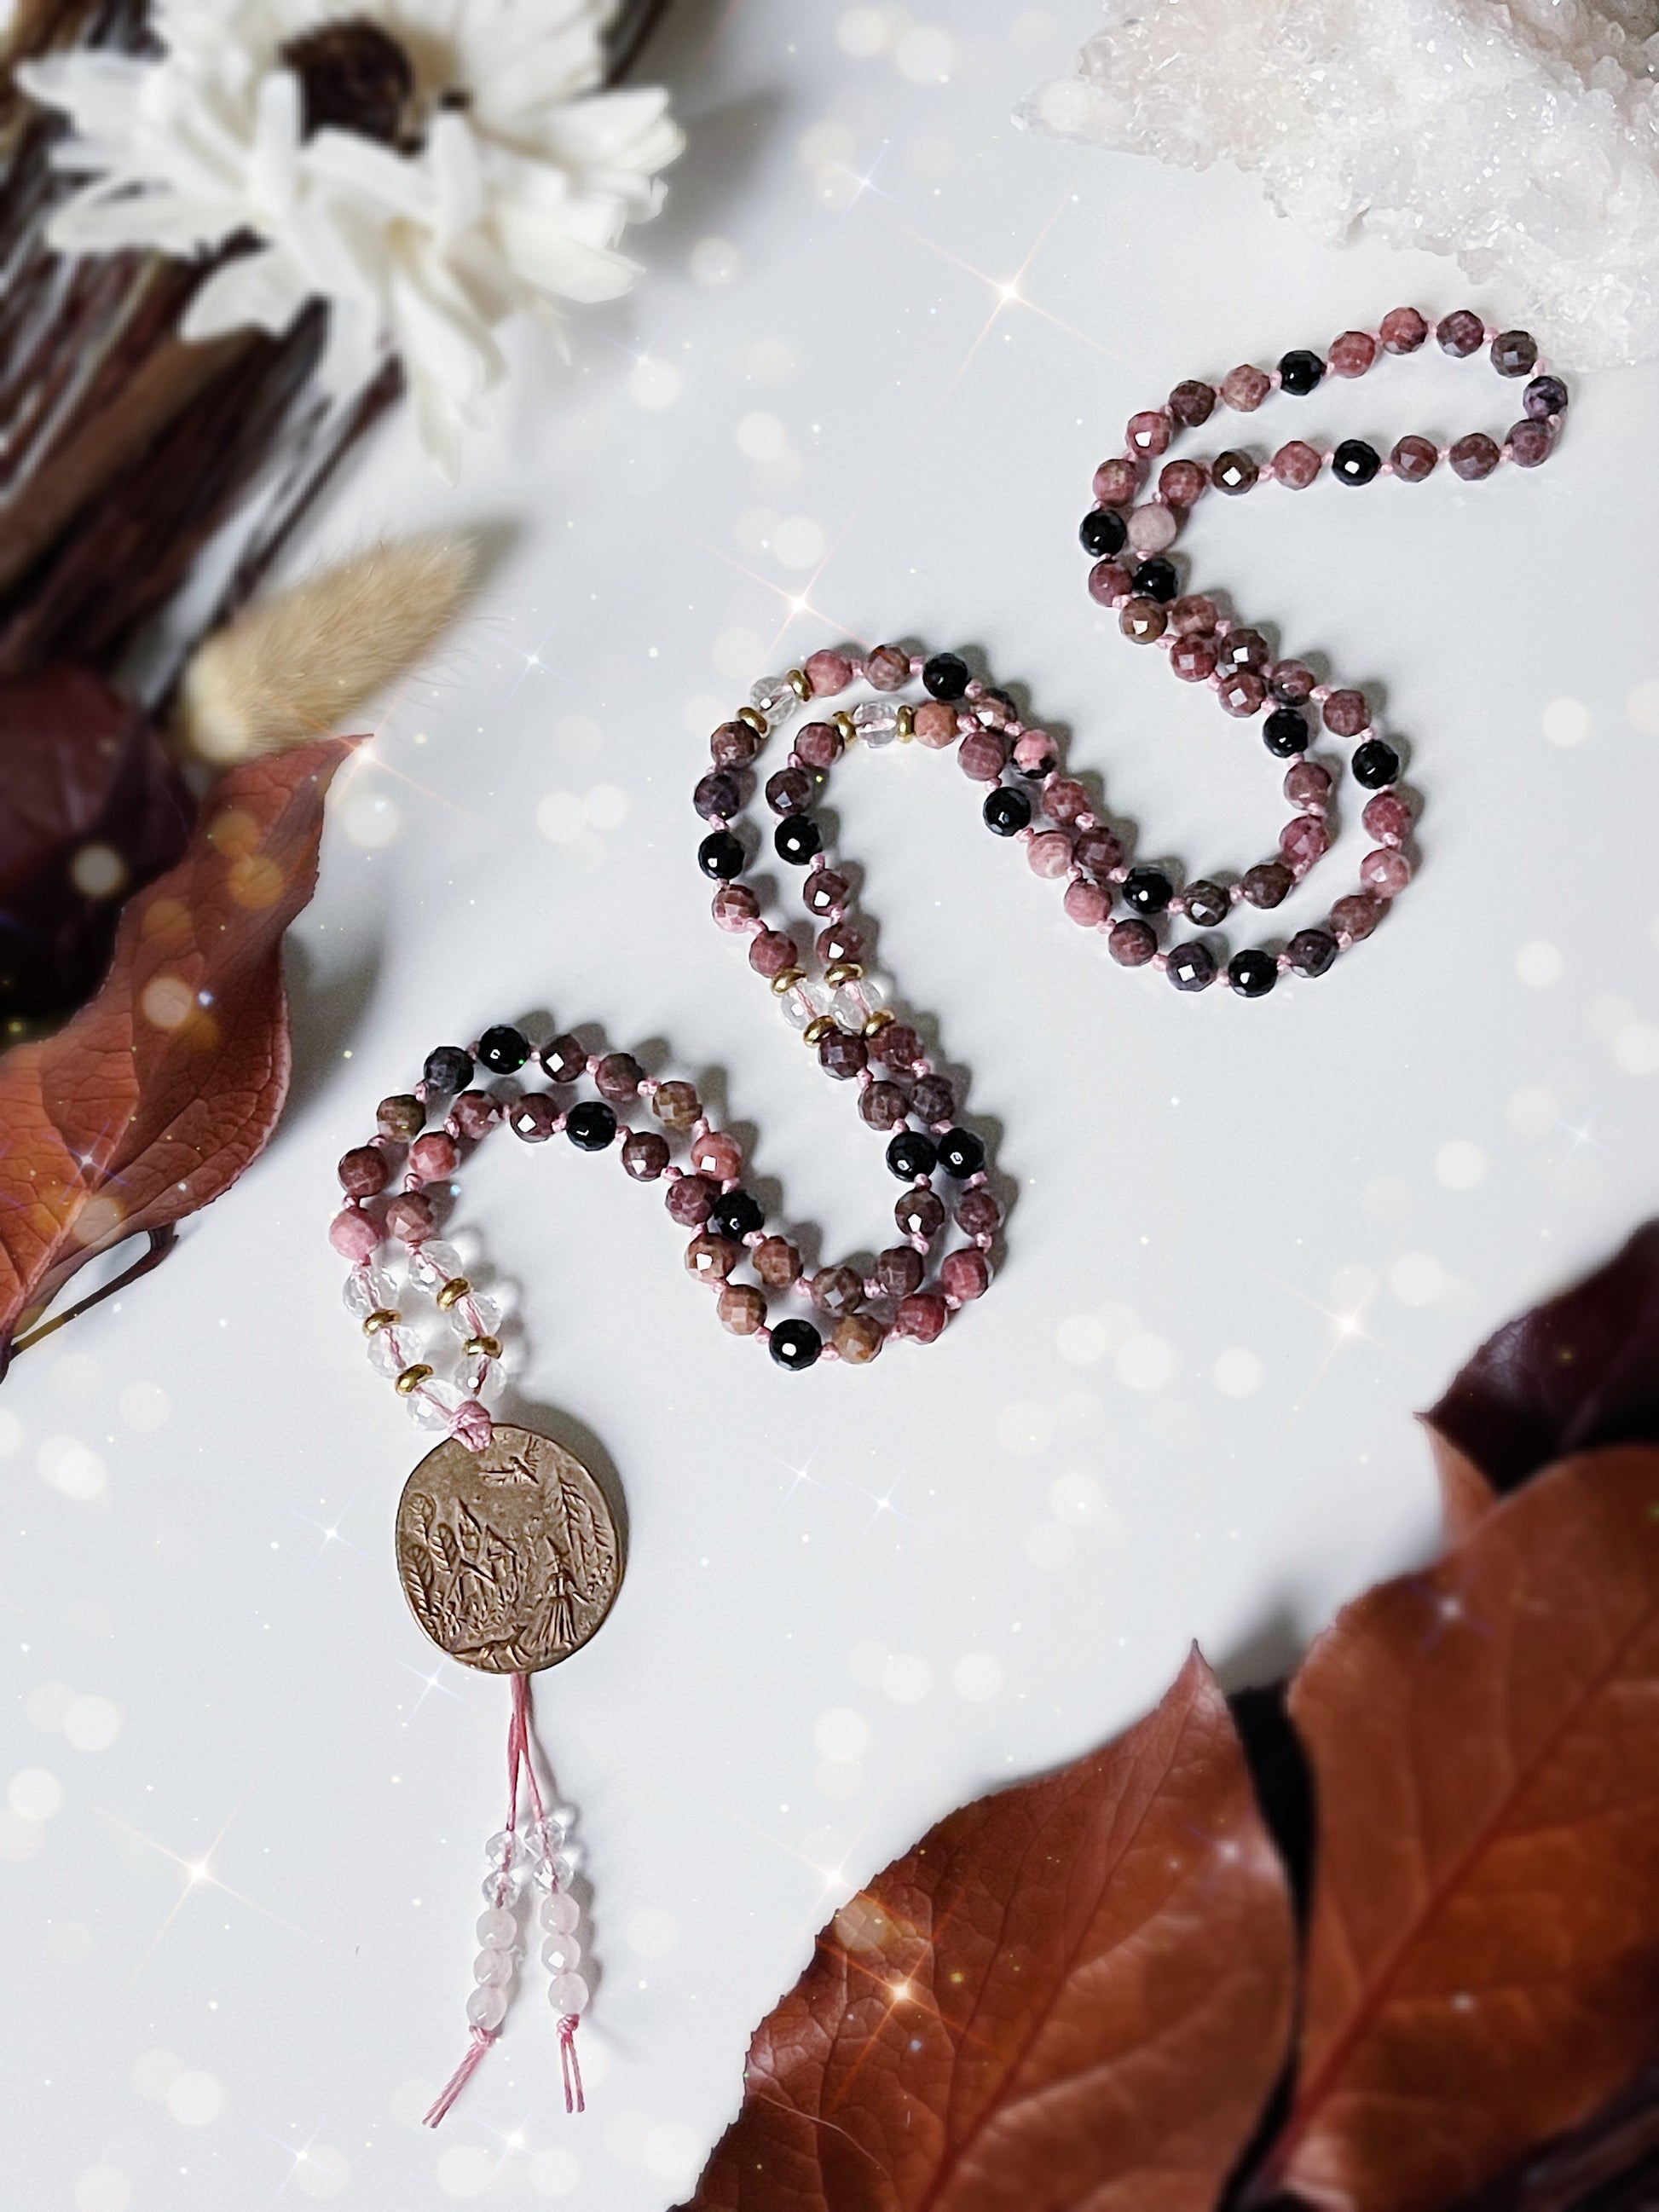 Bewitched Mala Necklace.  108 6mm beads of Rhodonite, Black Tourmaline, Clear Quartz and finished with a Bronze pendant of a witch in the woods.  Available at The Crystalline Moon. 